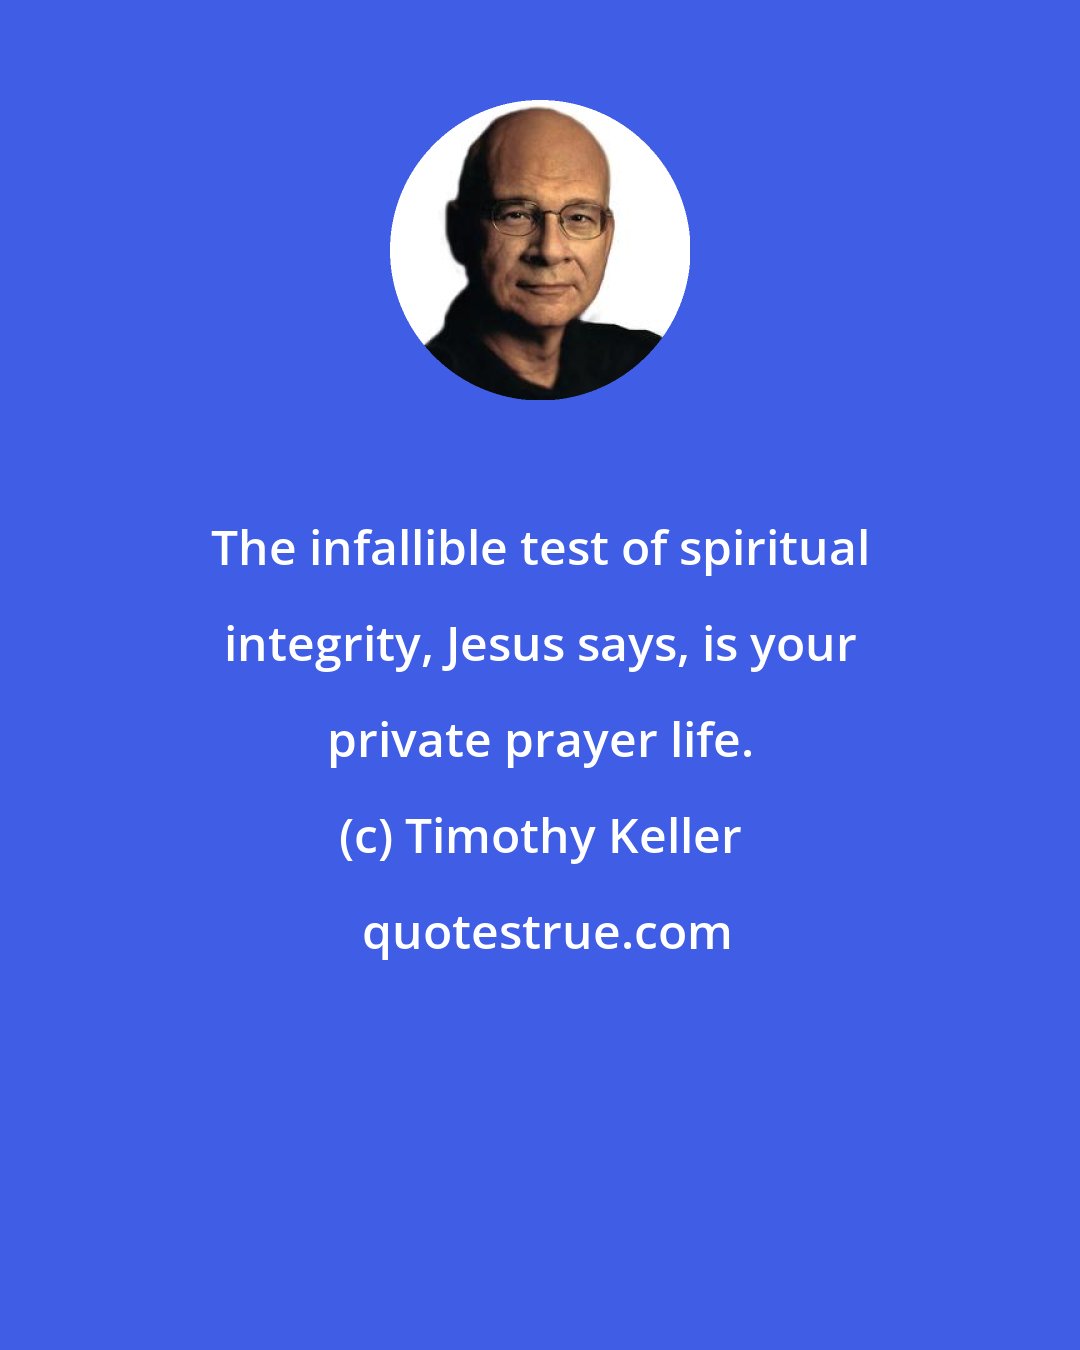 Timothy Keller: The infallible test of spiritual integrity, Jesus says, is your private prayer life.